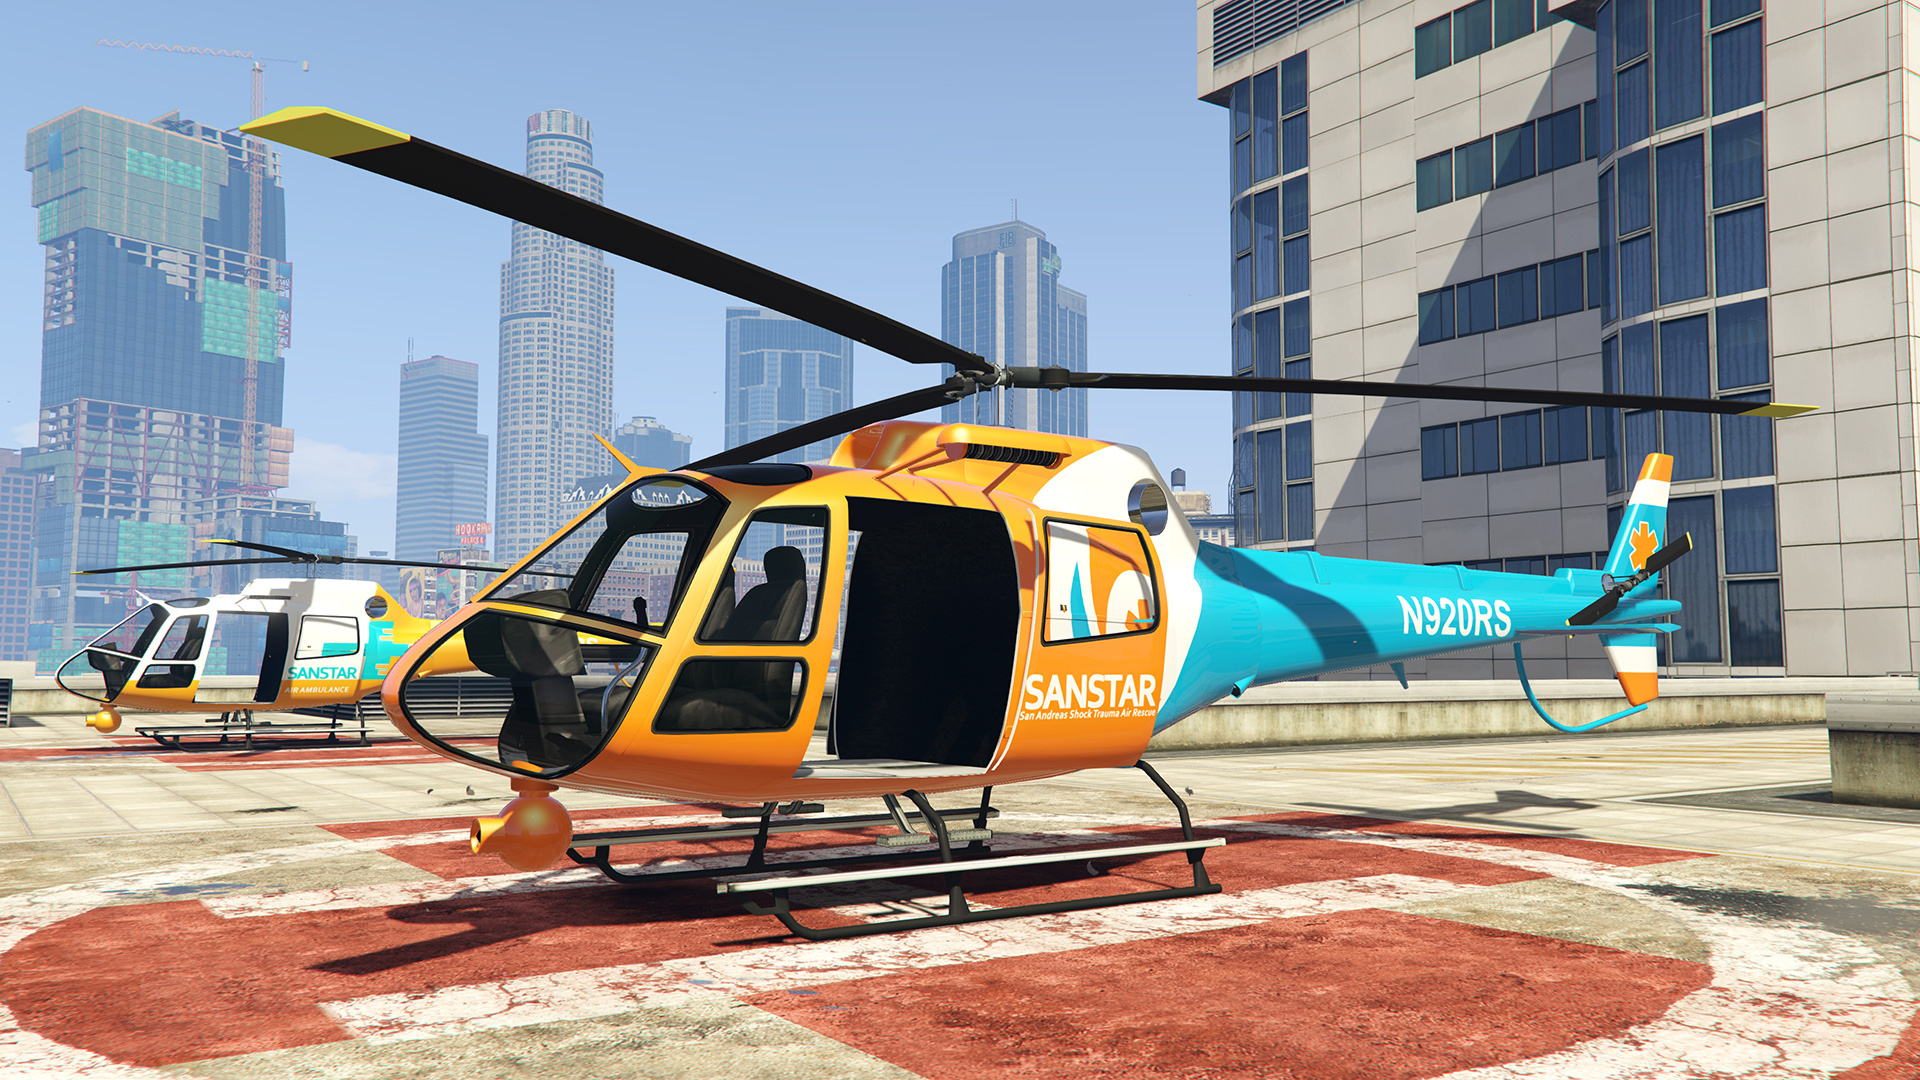 GTA San Andreas GTA V Helicopter Pack Mod 